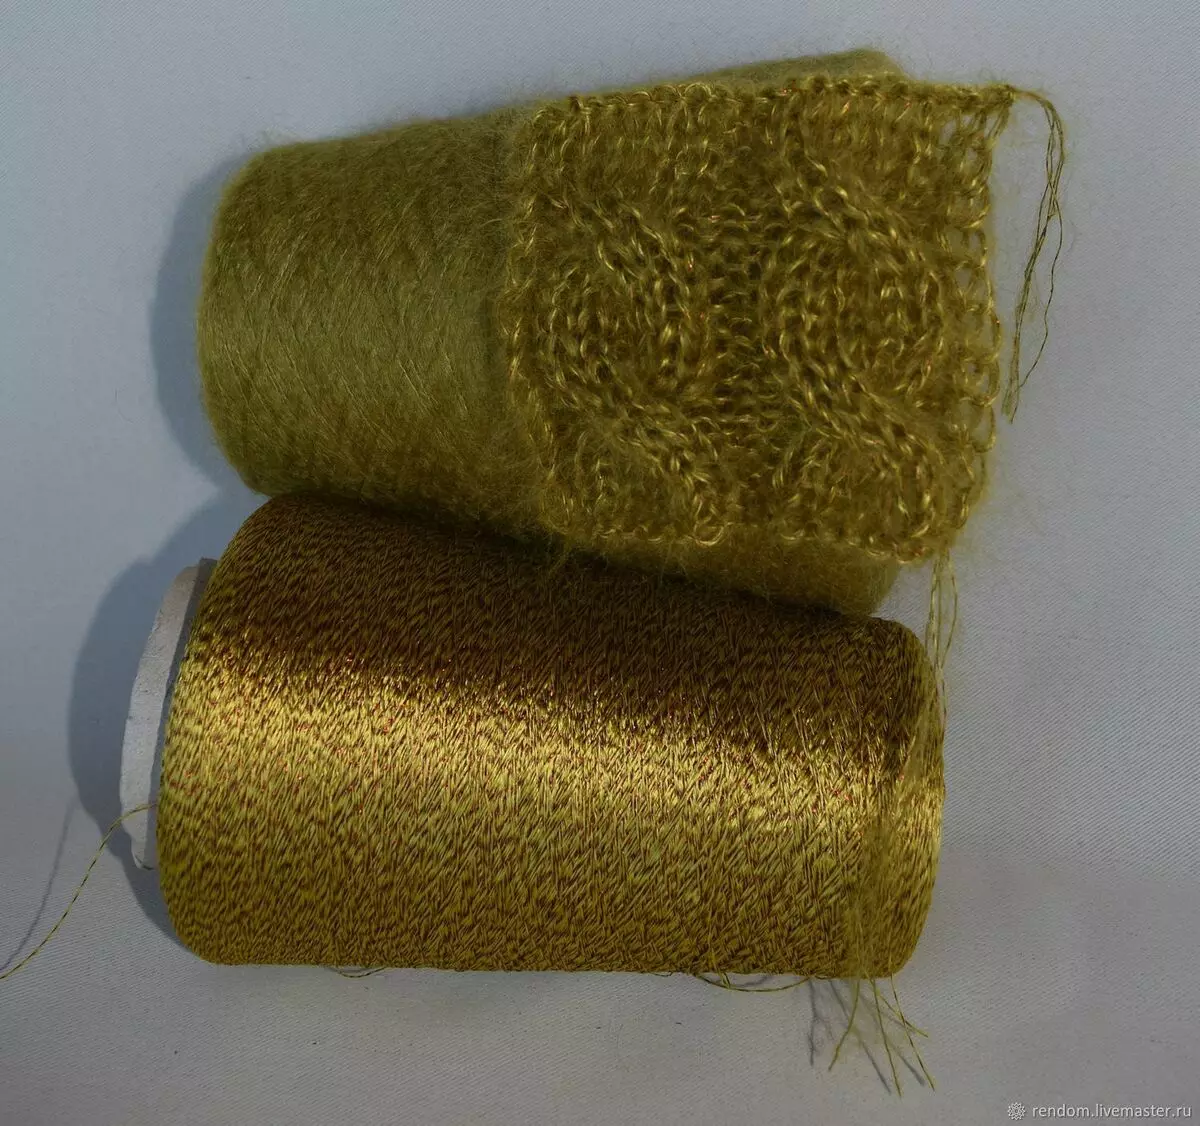 Viscose yarn: What is it? Viscose silk with Lurex and without knitting, properties, characteristics and composition. What can you connect? 17398_15